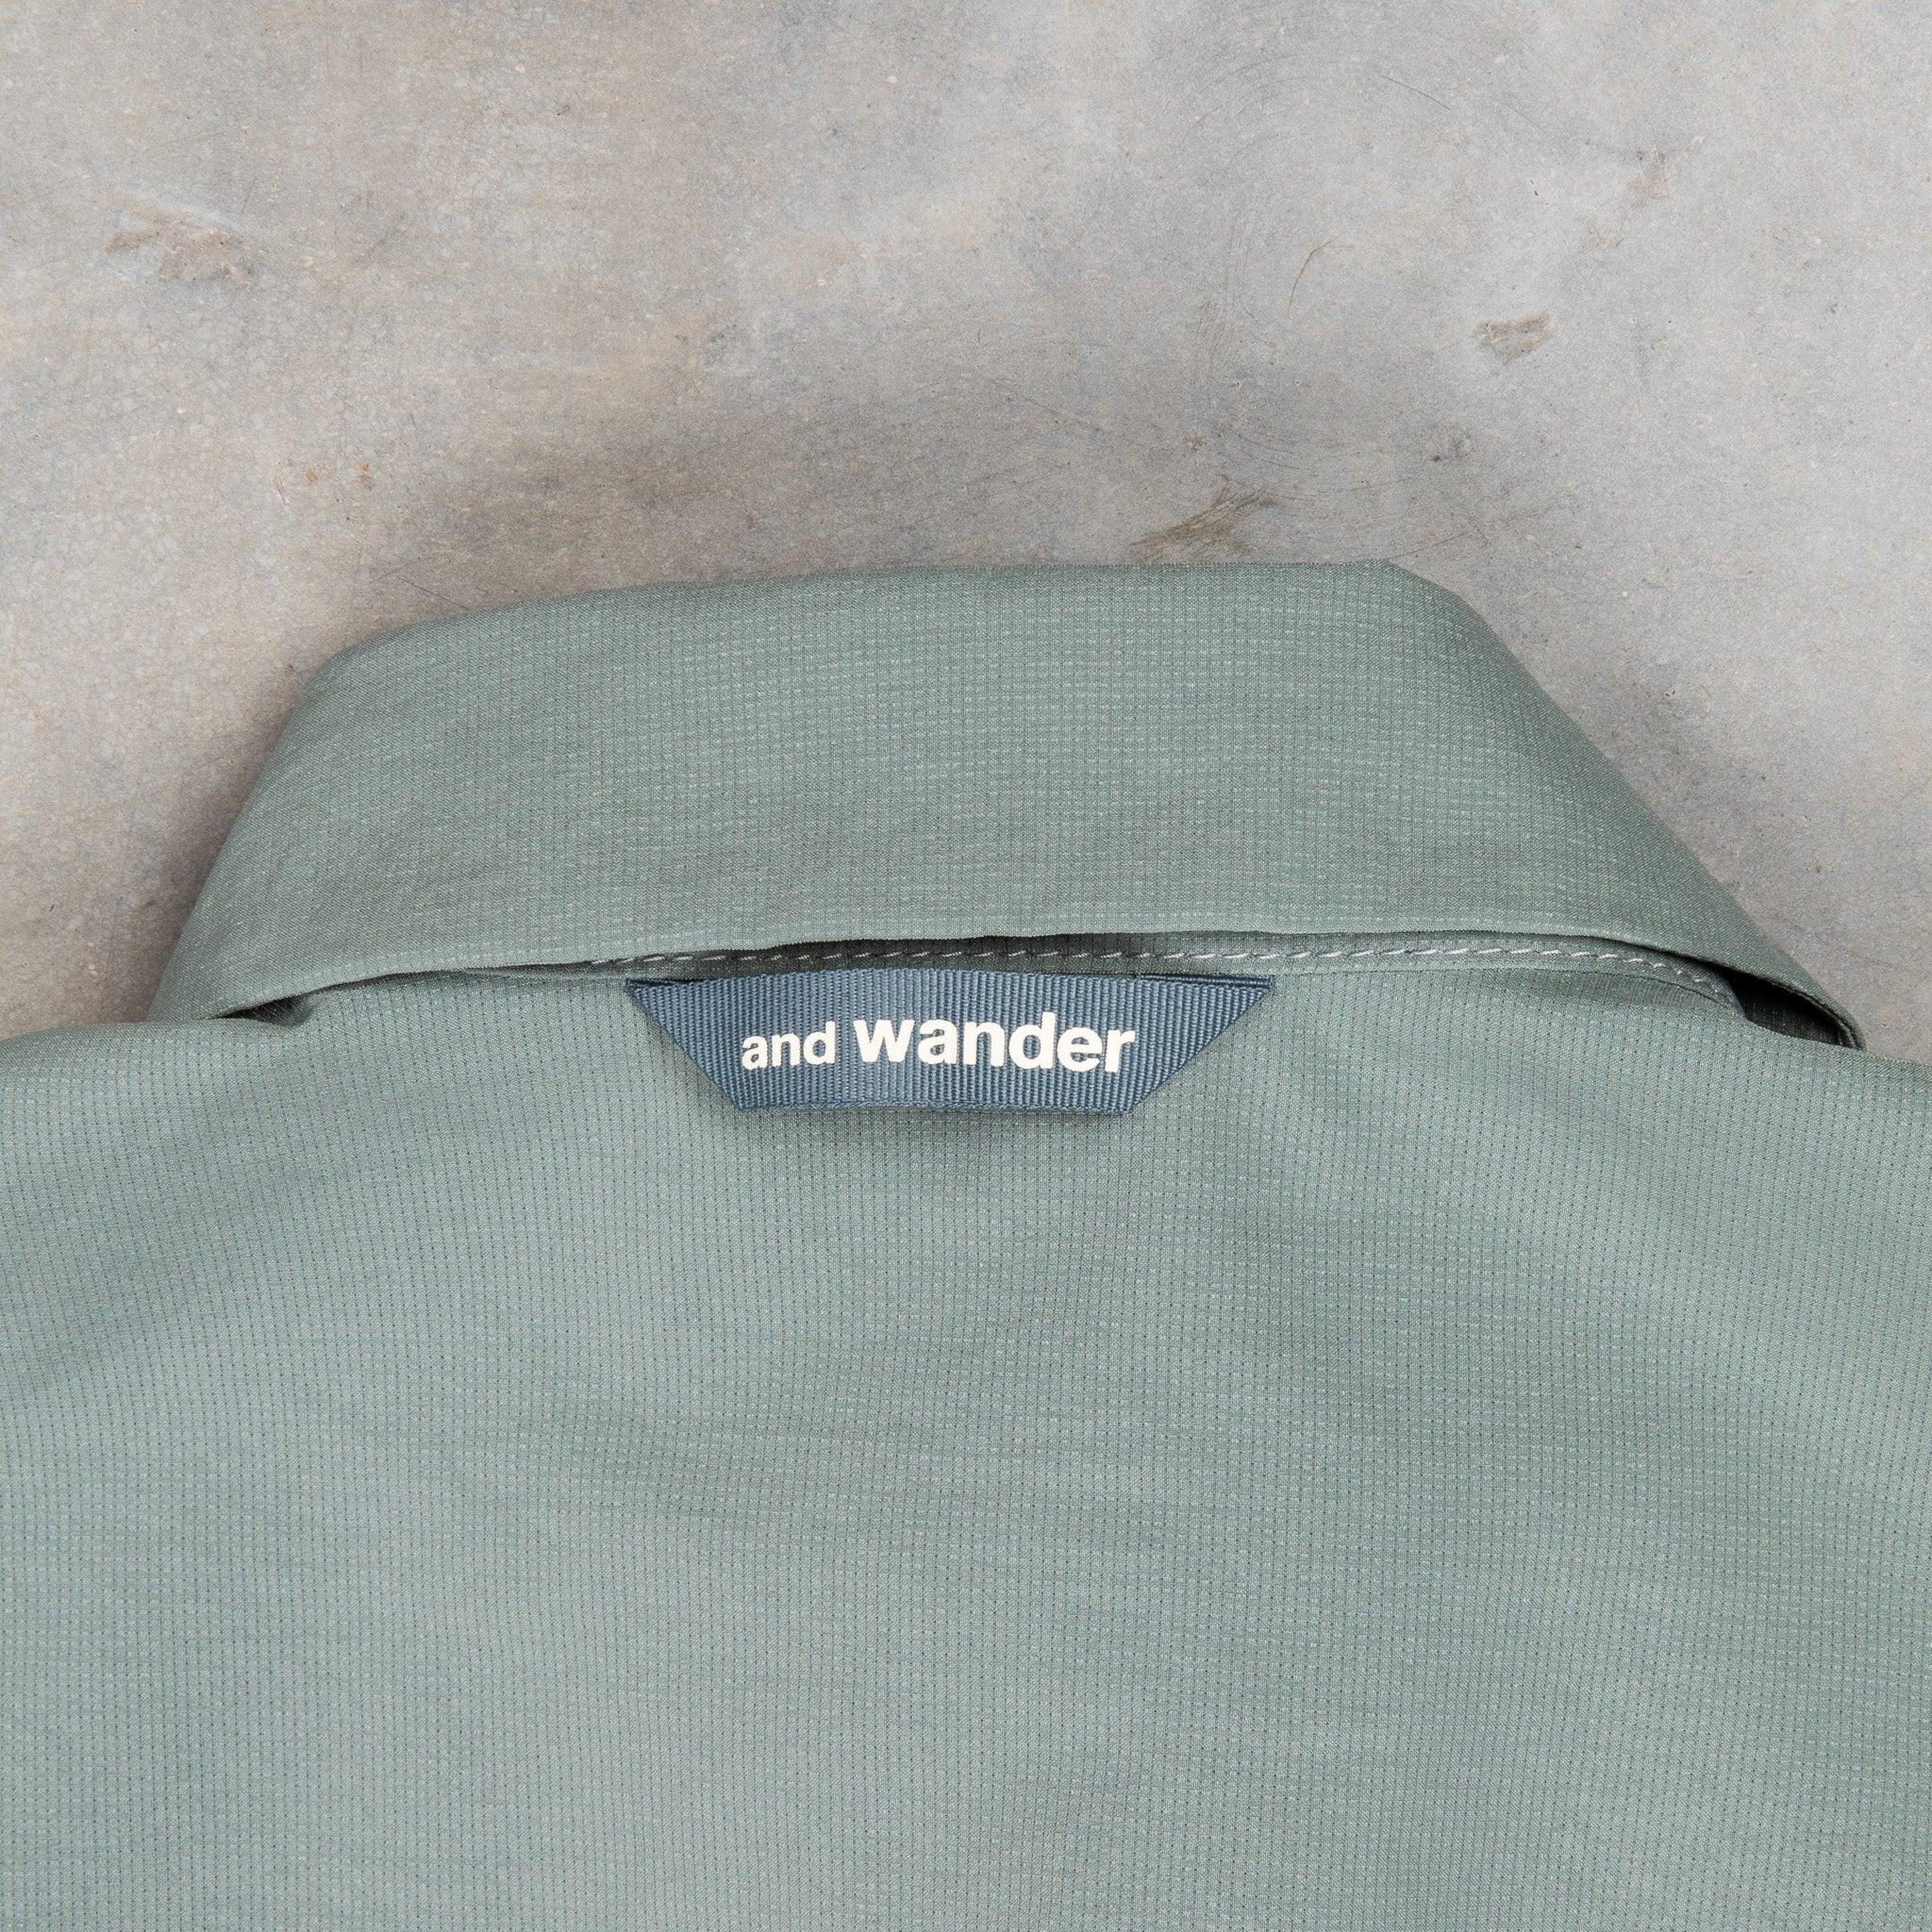 And Wander Dry Breathable LS Shirt Blue Grey